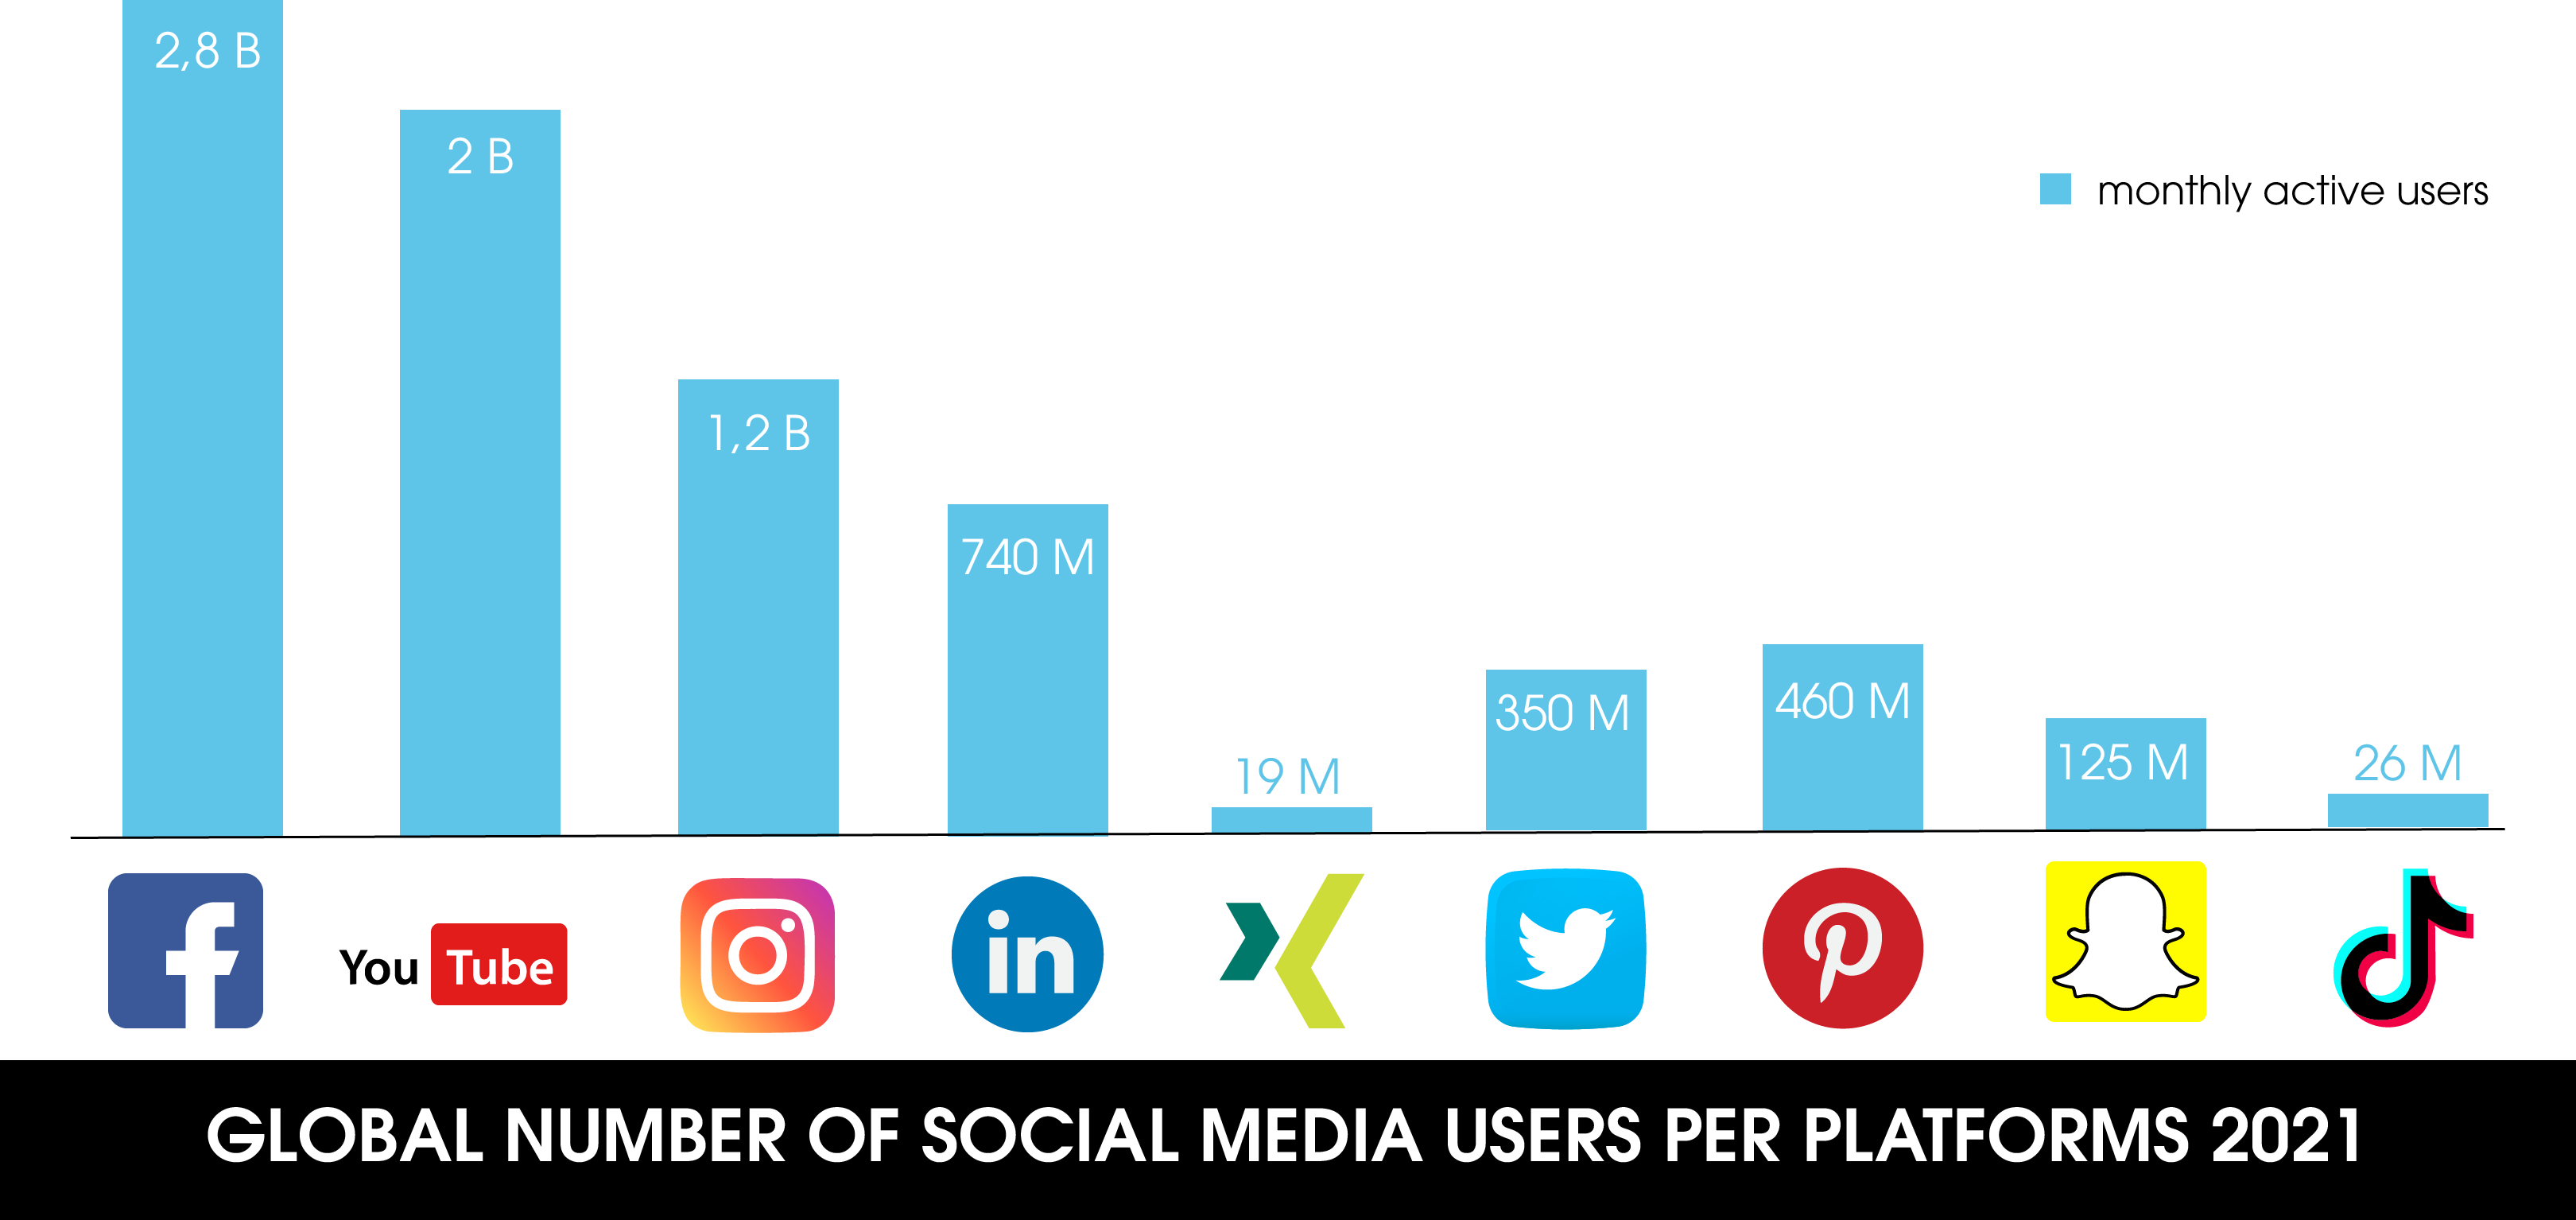 The chart shows the monthly active users of the most popular social media platforms in Germany in 2021, measured in millions.